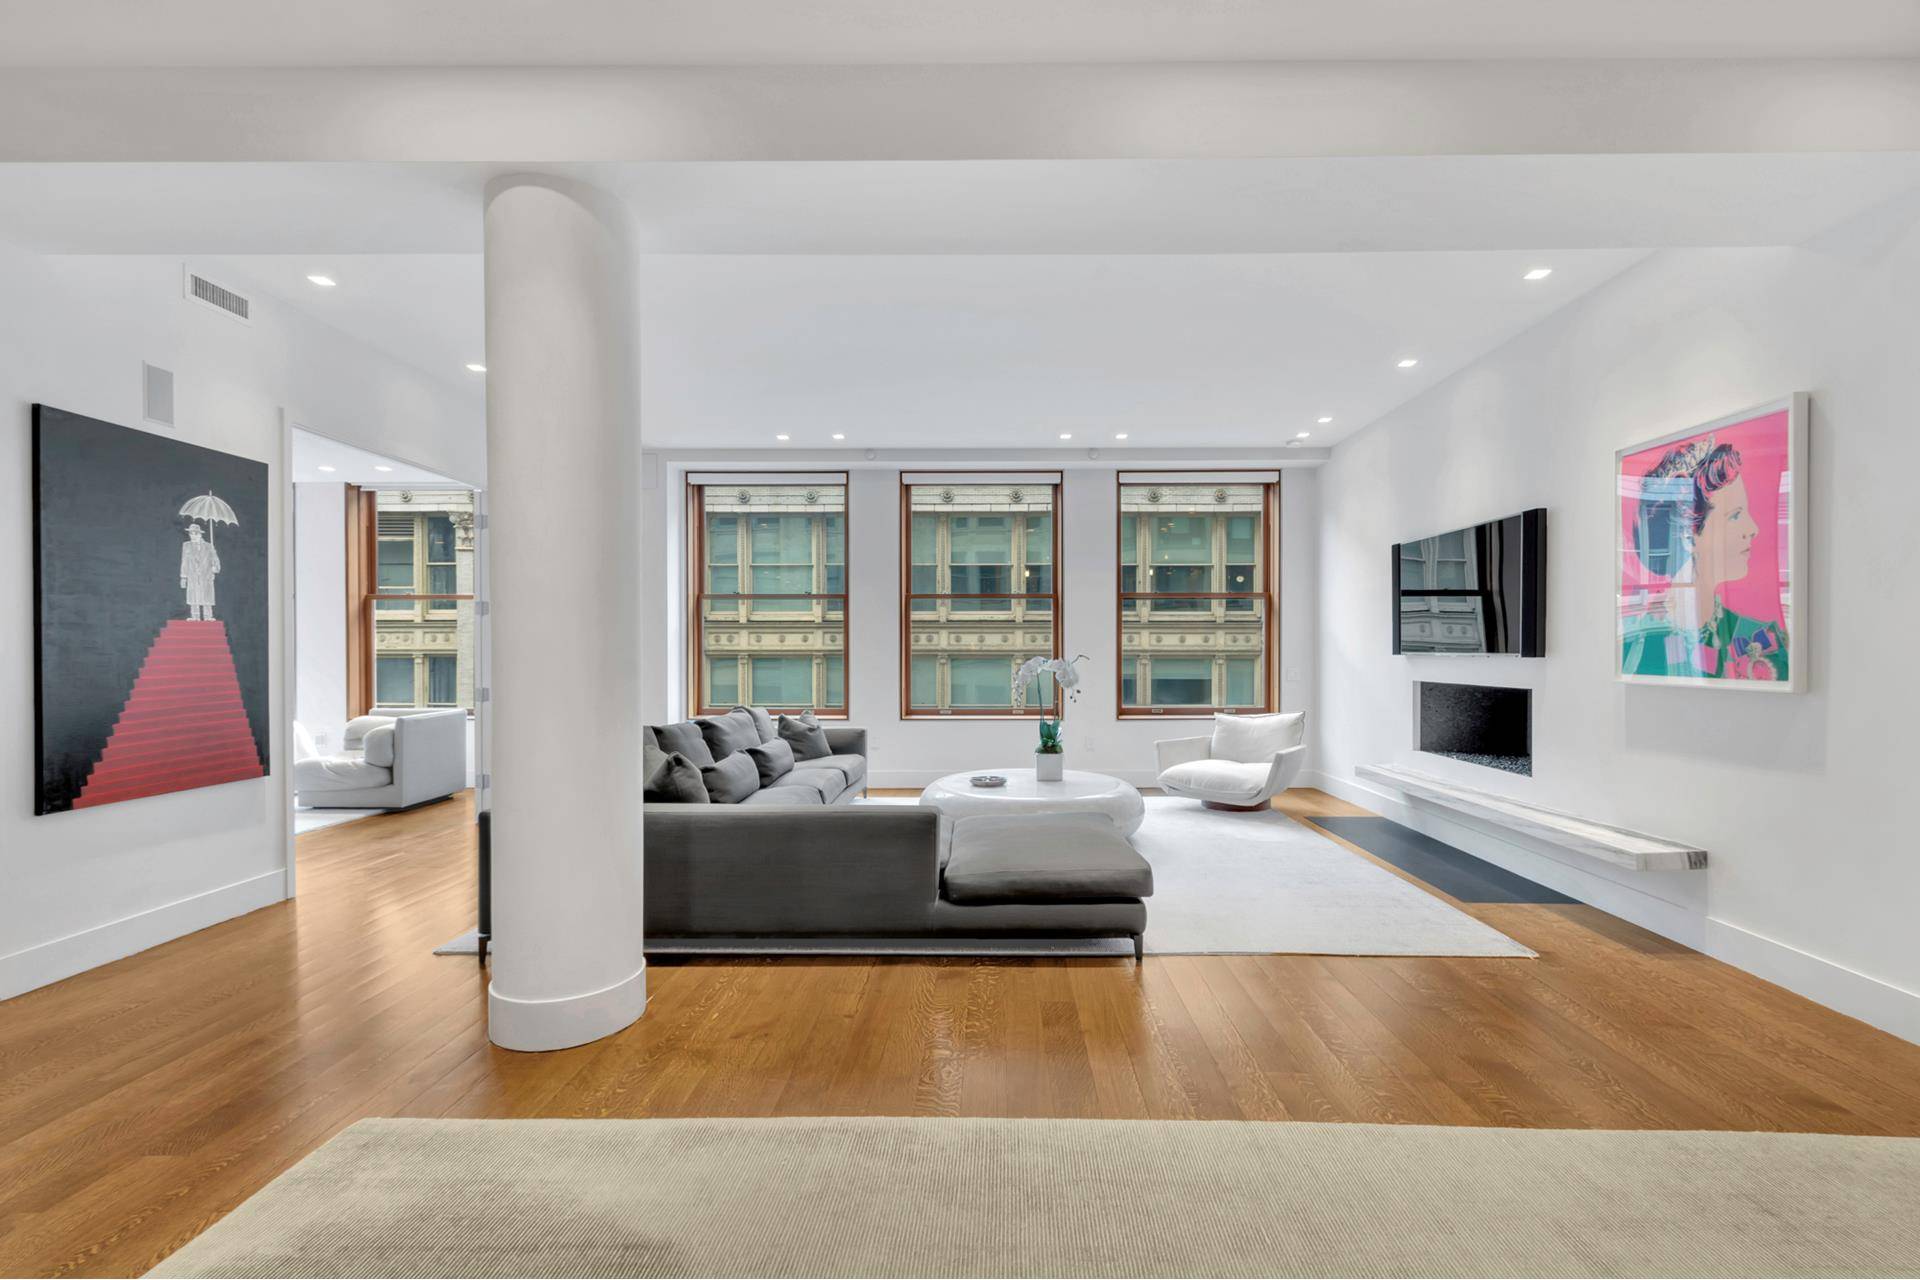 Located at the crossroads of Flatiron and Chelsea, this expansive 3 bedroom 3 bathroom loft, at the Altair, is a showpiece of luxury and design.